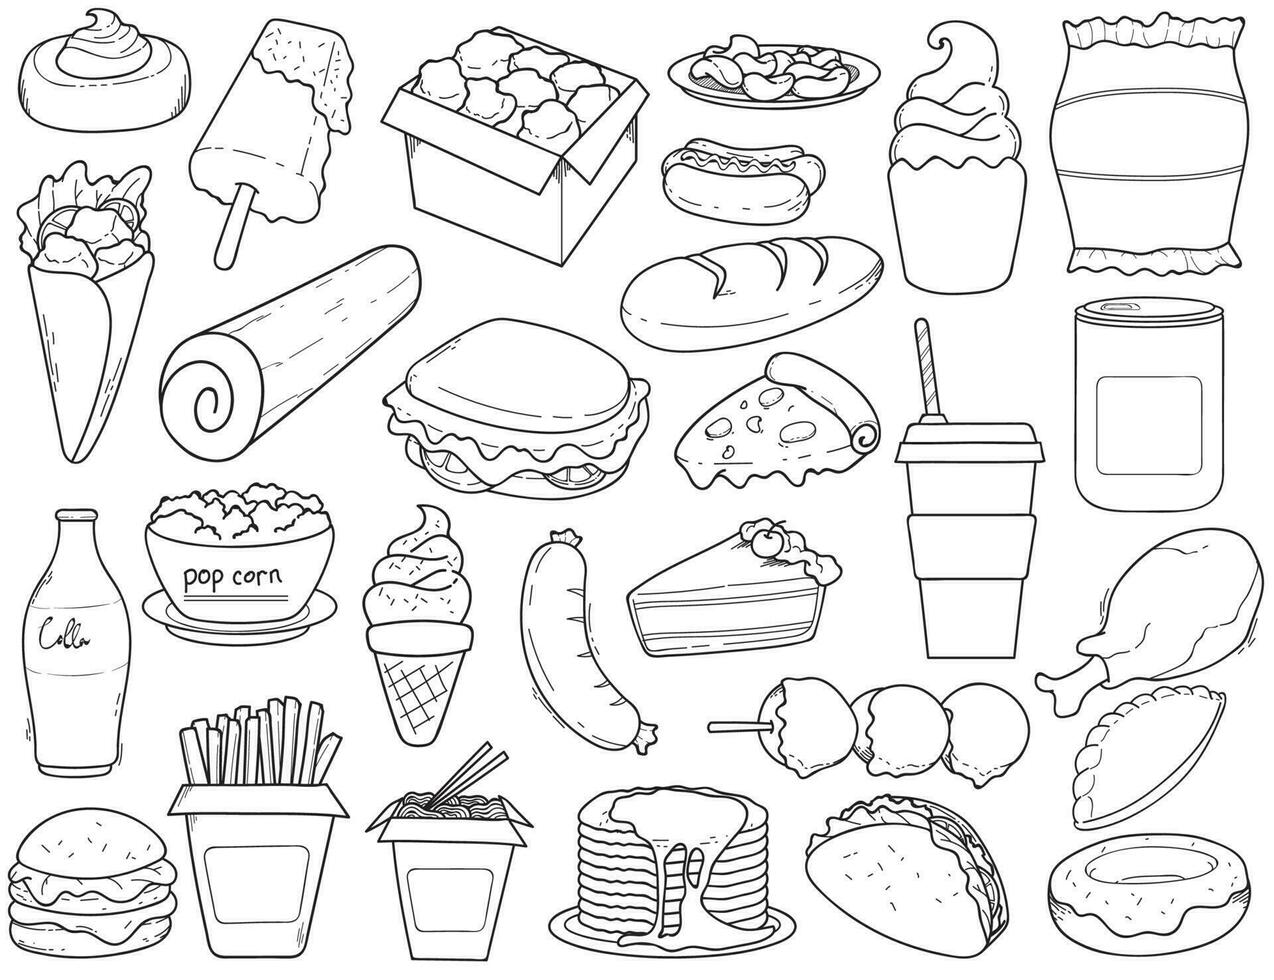 Set of hand-drawn doodle illustrations of fast food vector